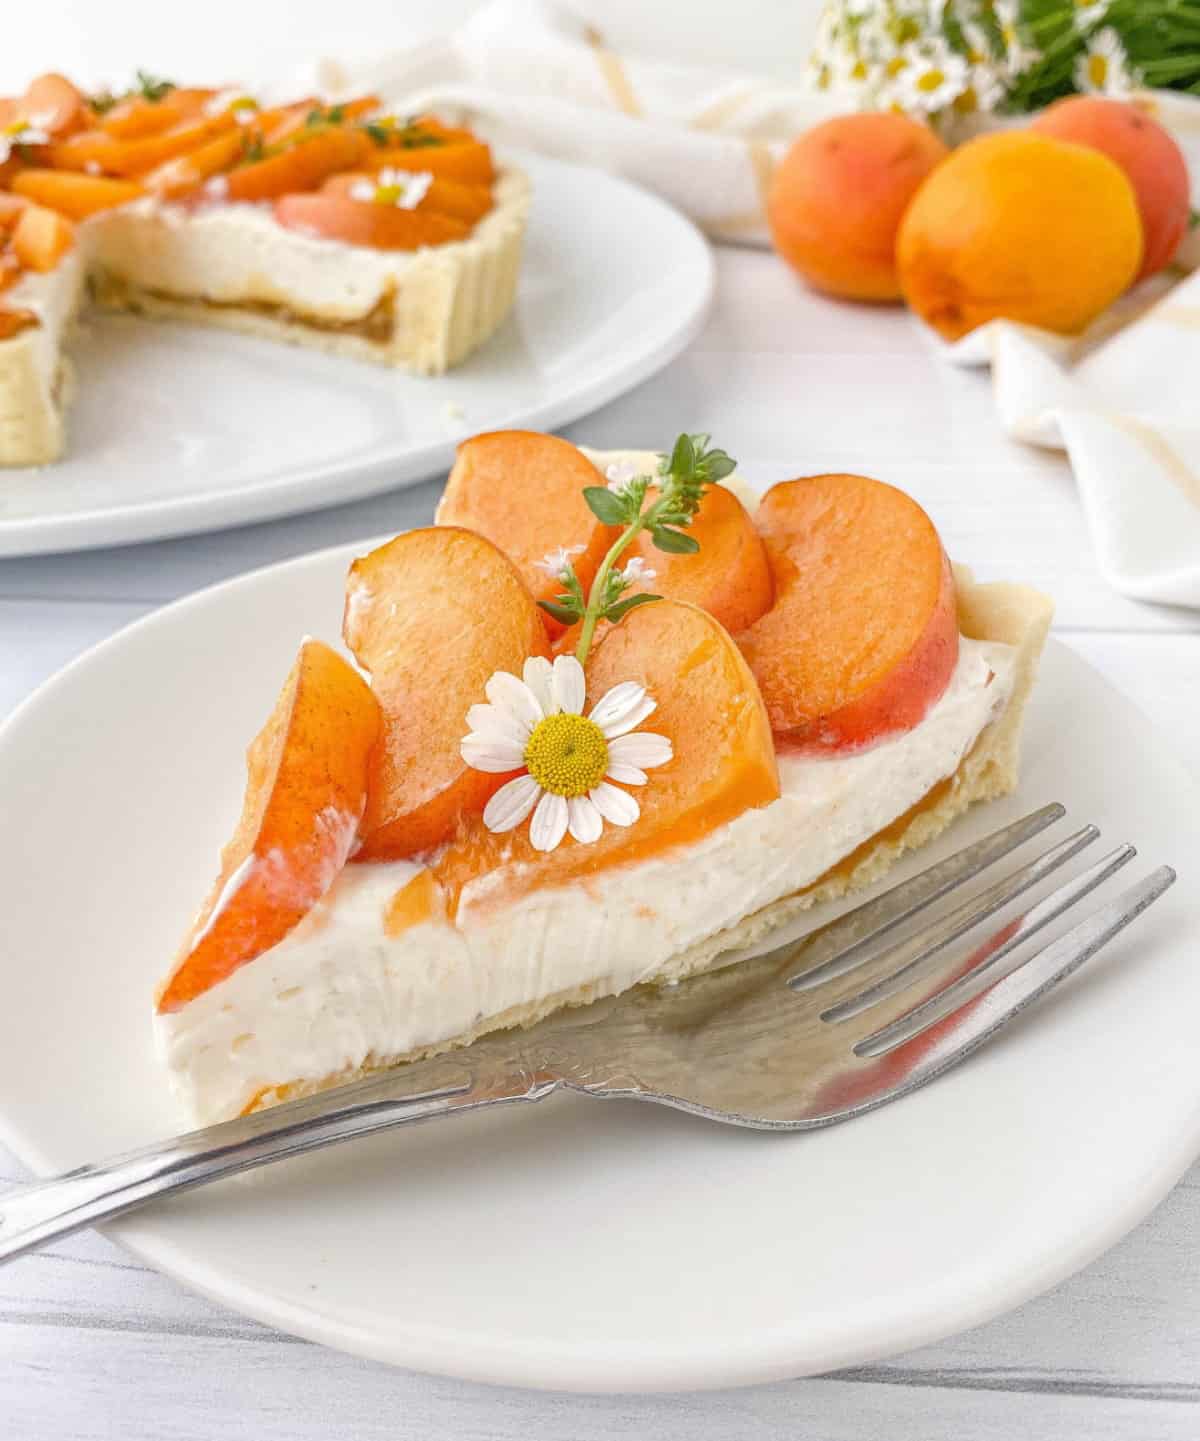 Slice of Apricot Tart on a white plate with a silver fork alongside.